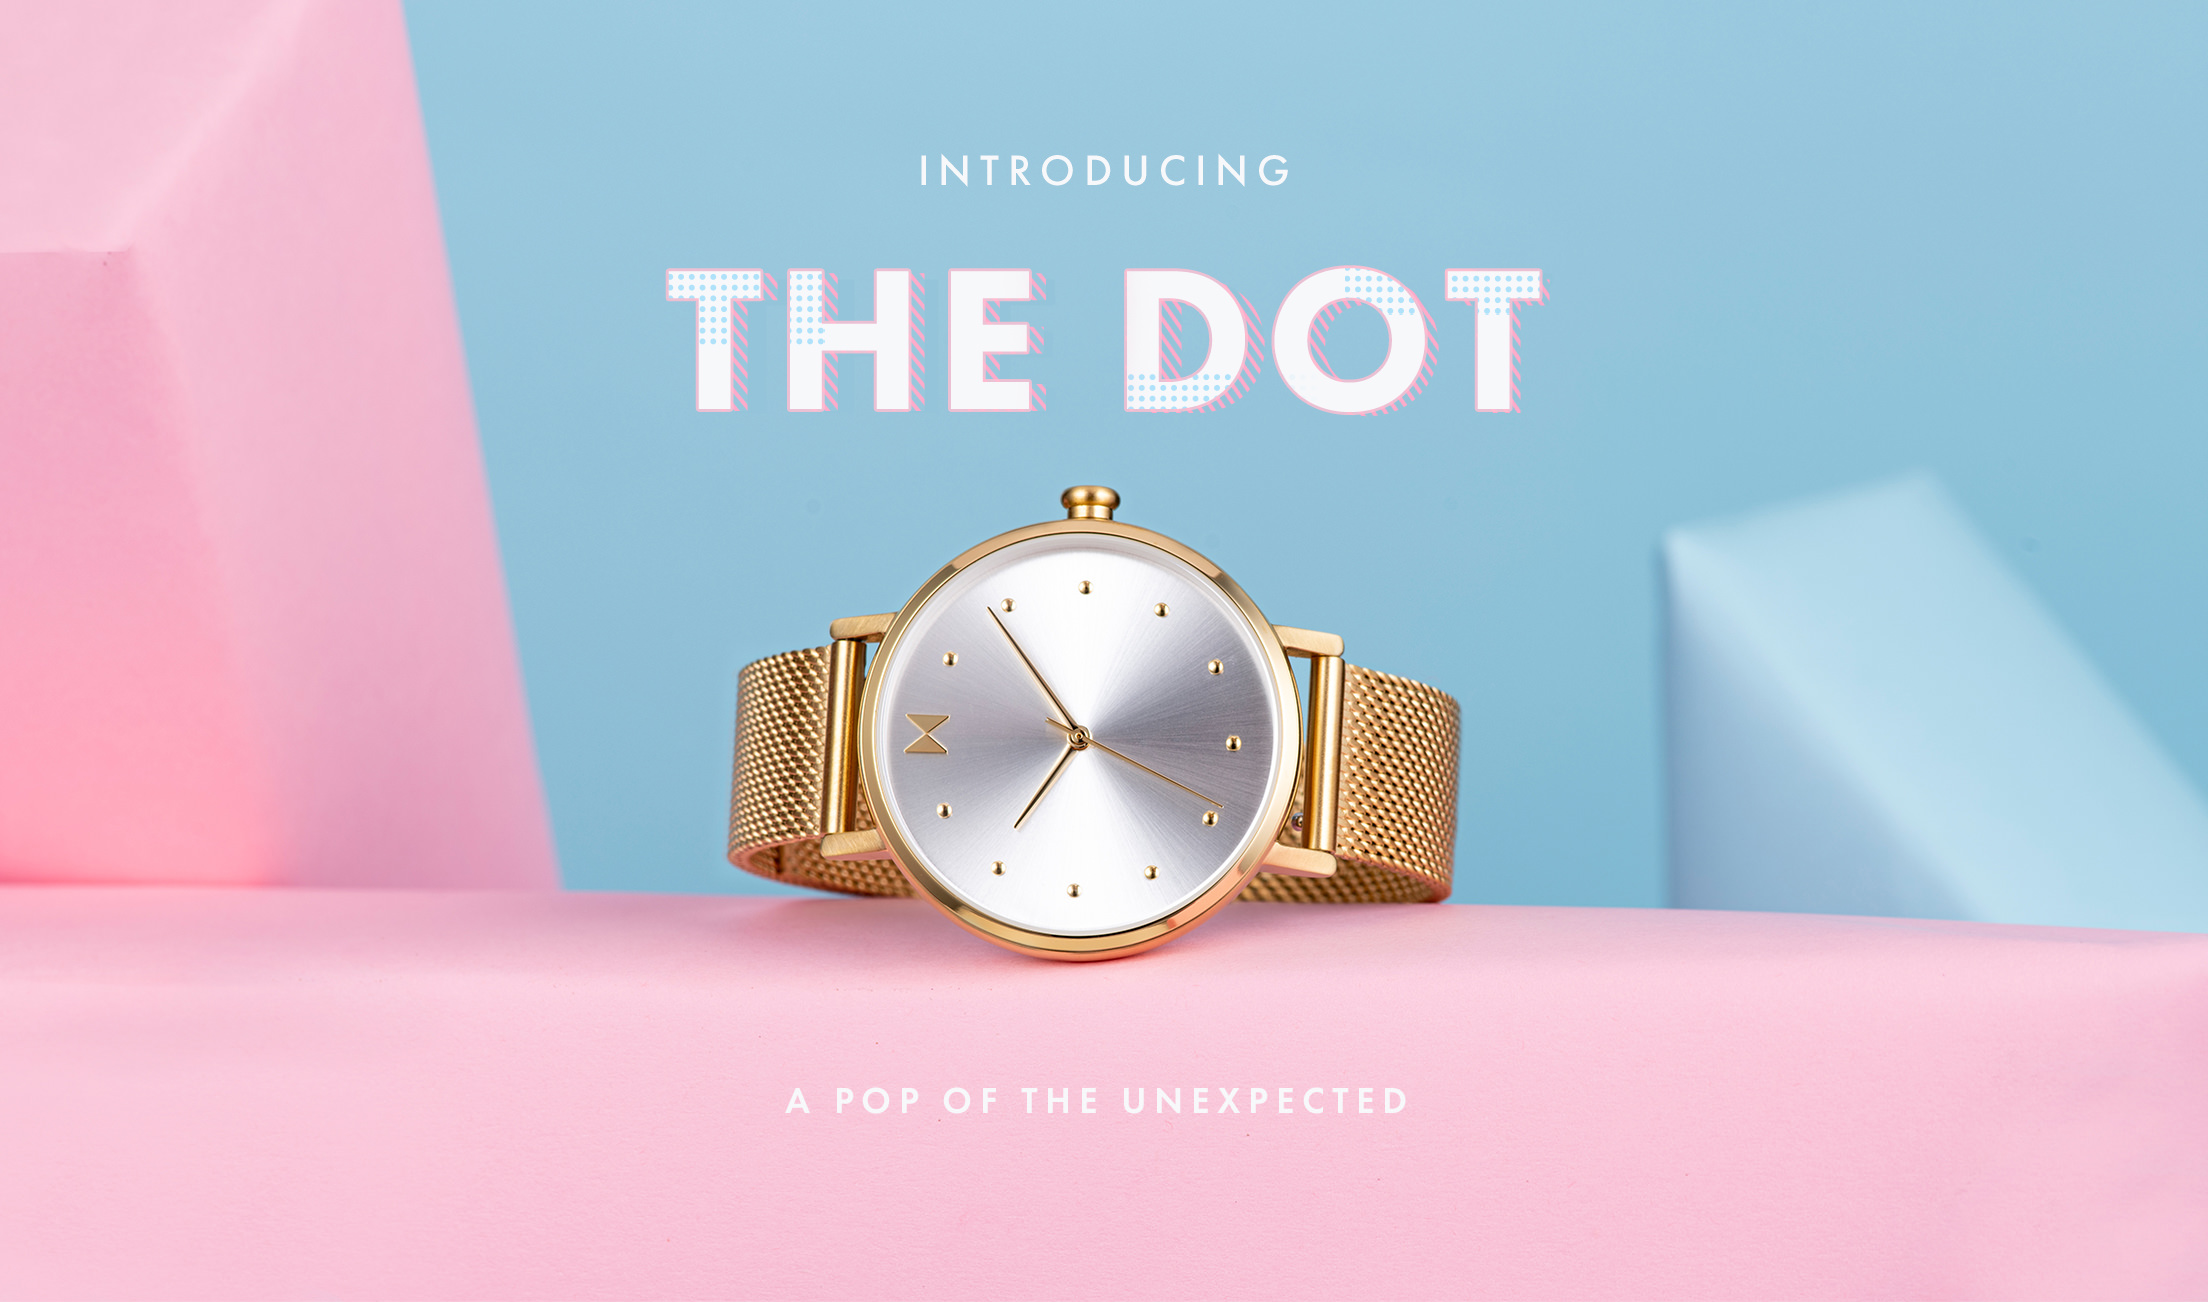 Introducing the Dot. A pop of the unexpected